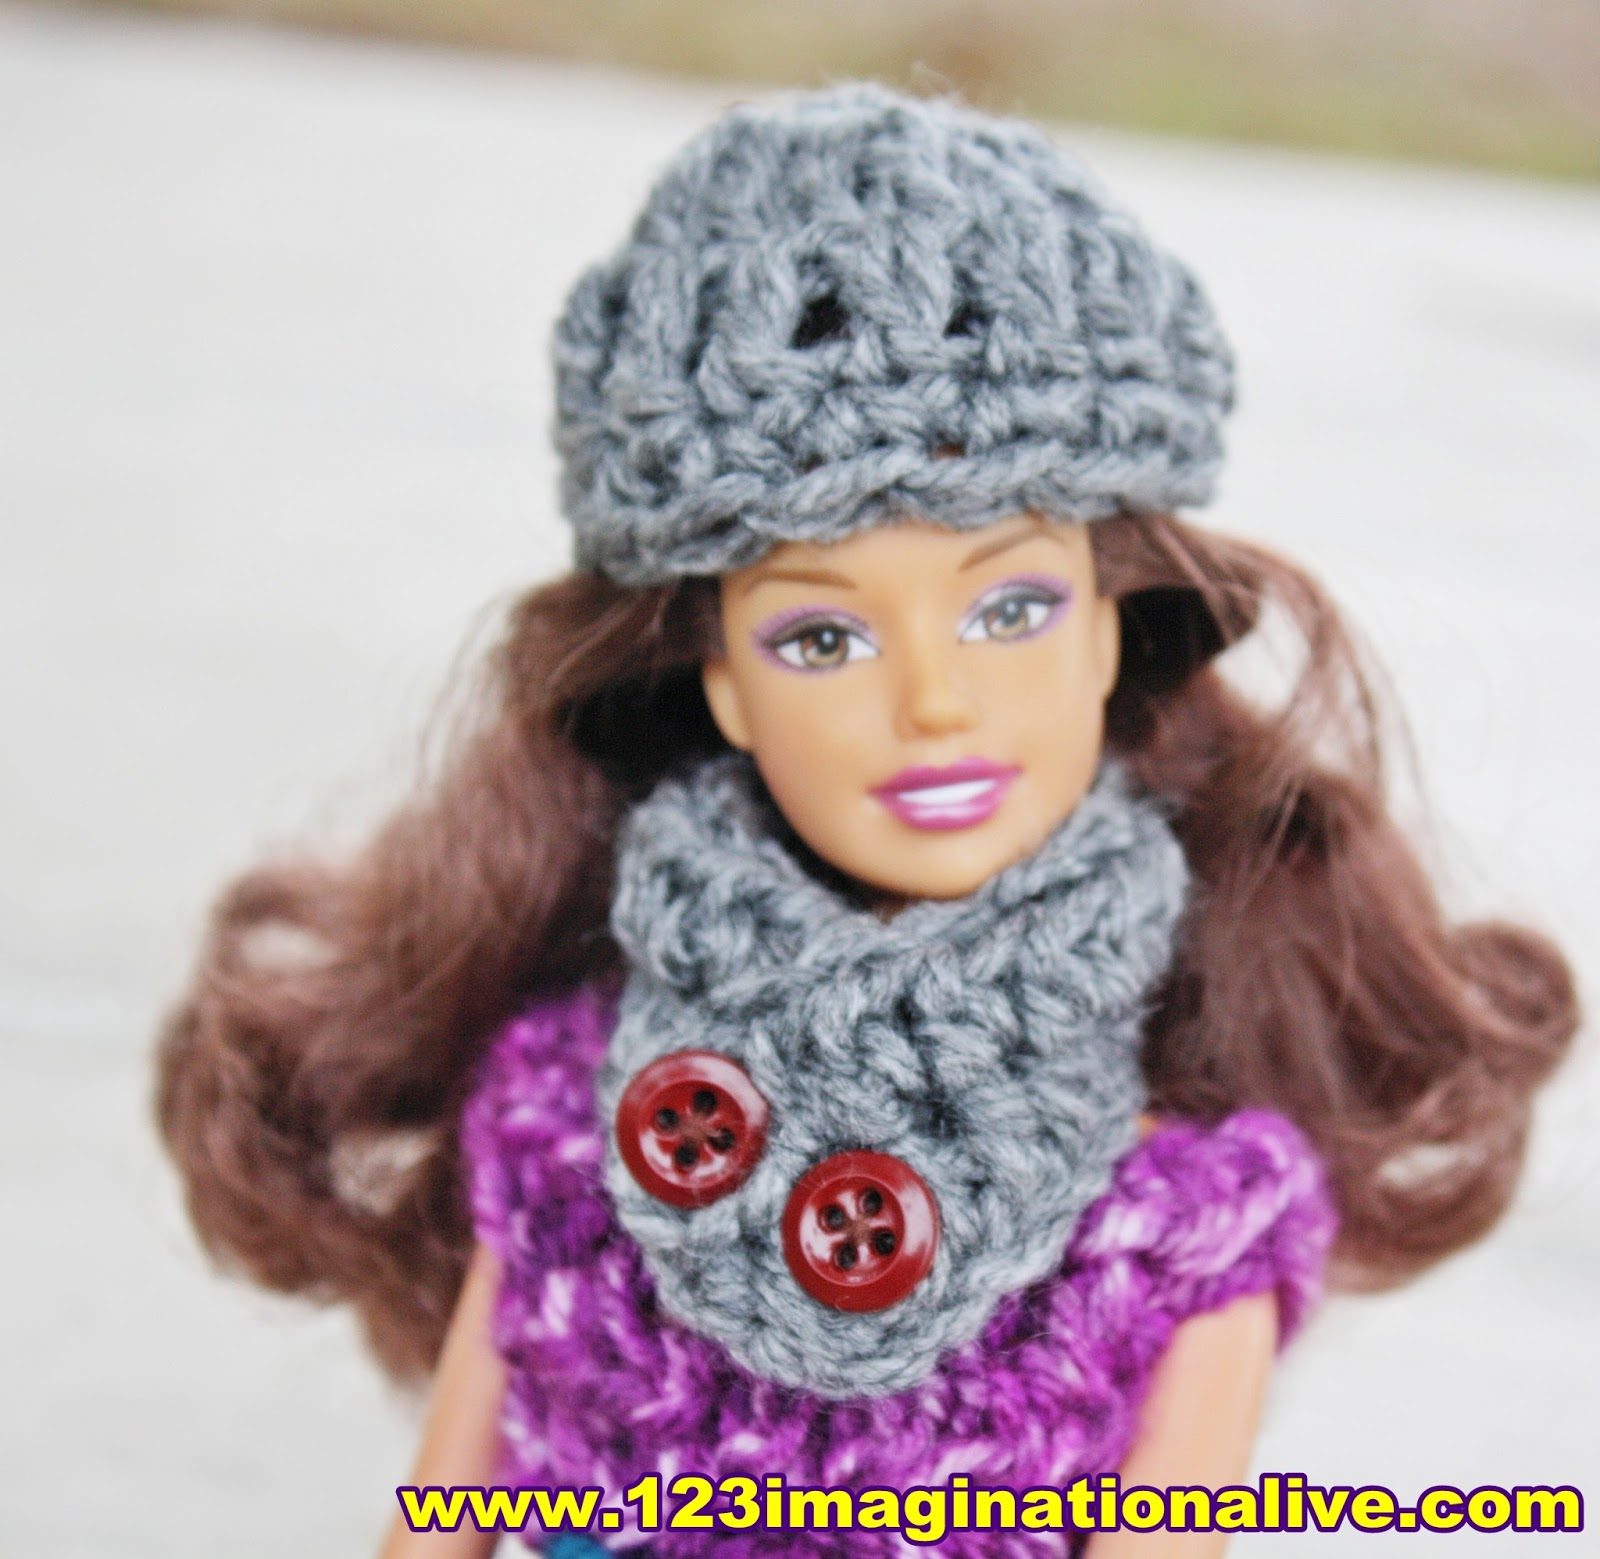 Free Knitting Patterns For Dolls Hats 123imaginationalive How To Crochet A Barbie Doll Hat Cowl Free